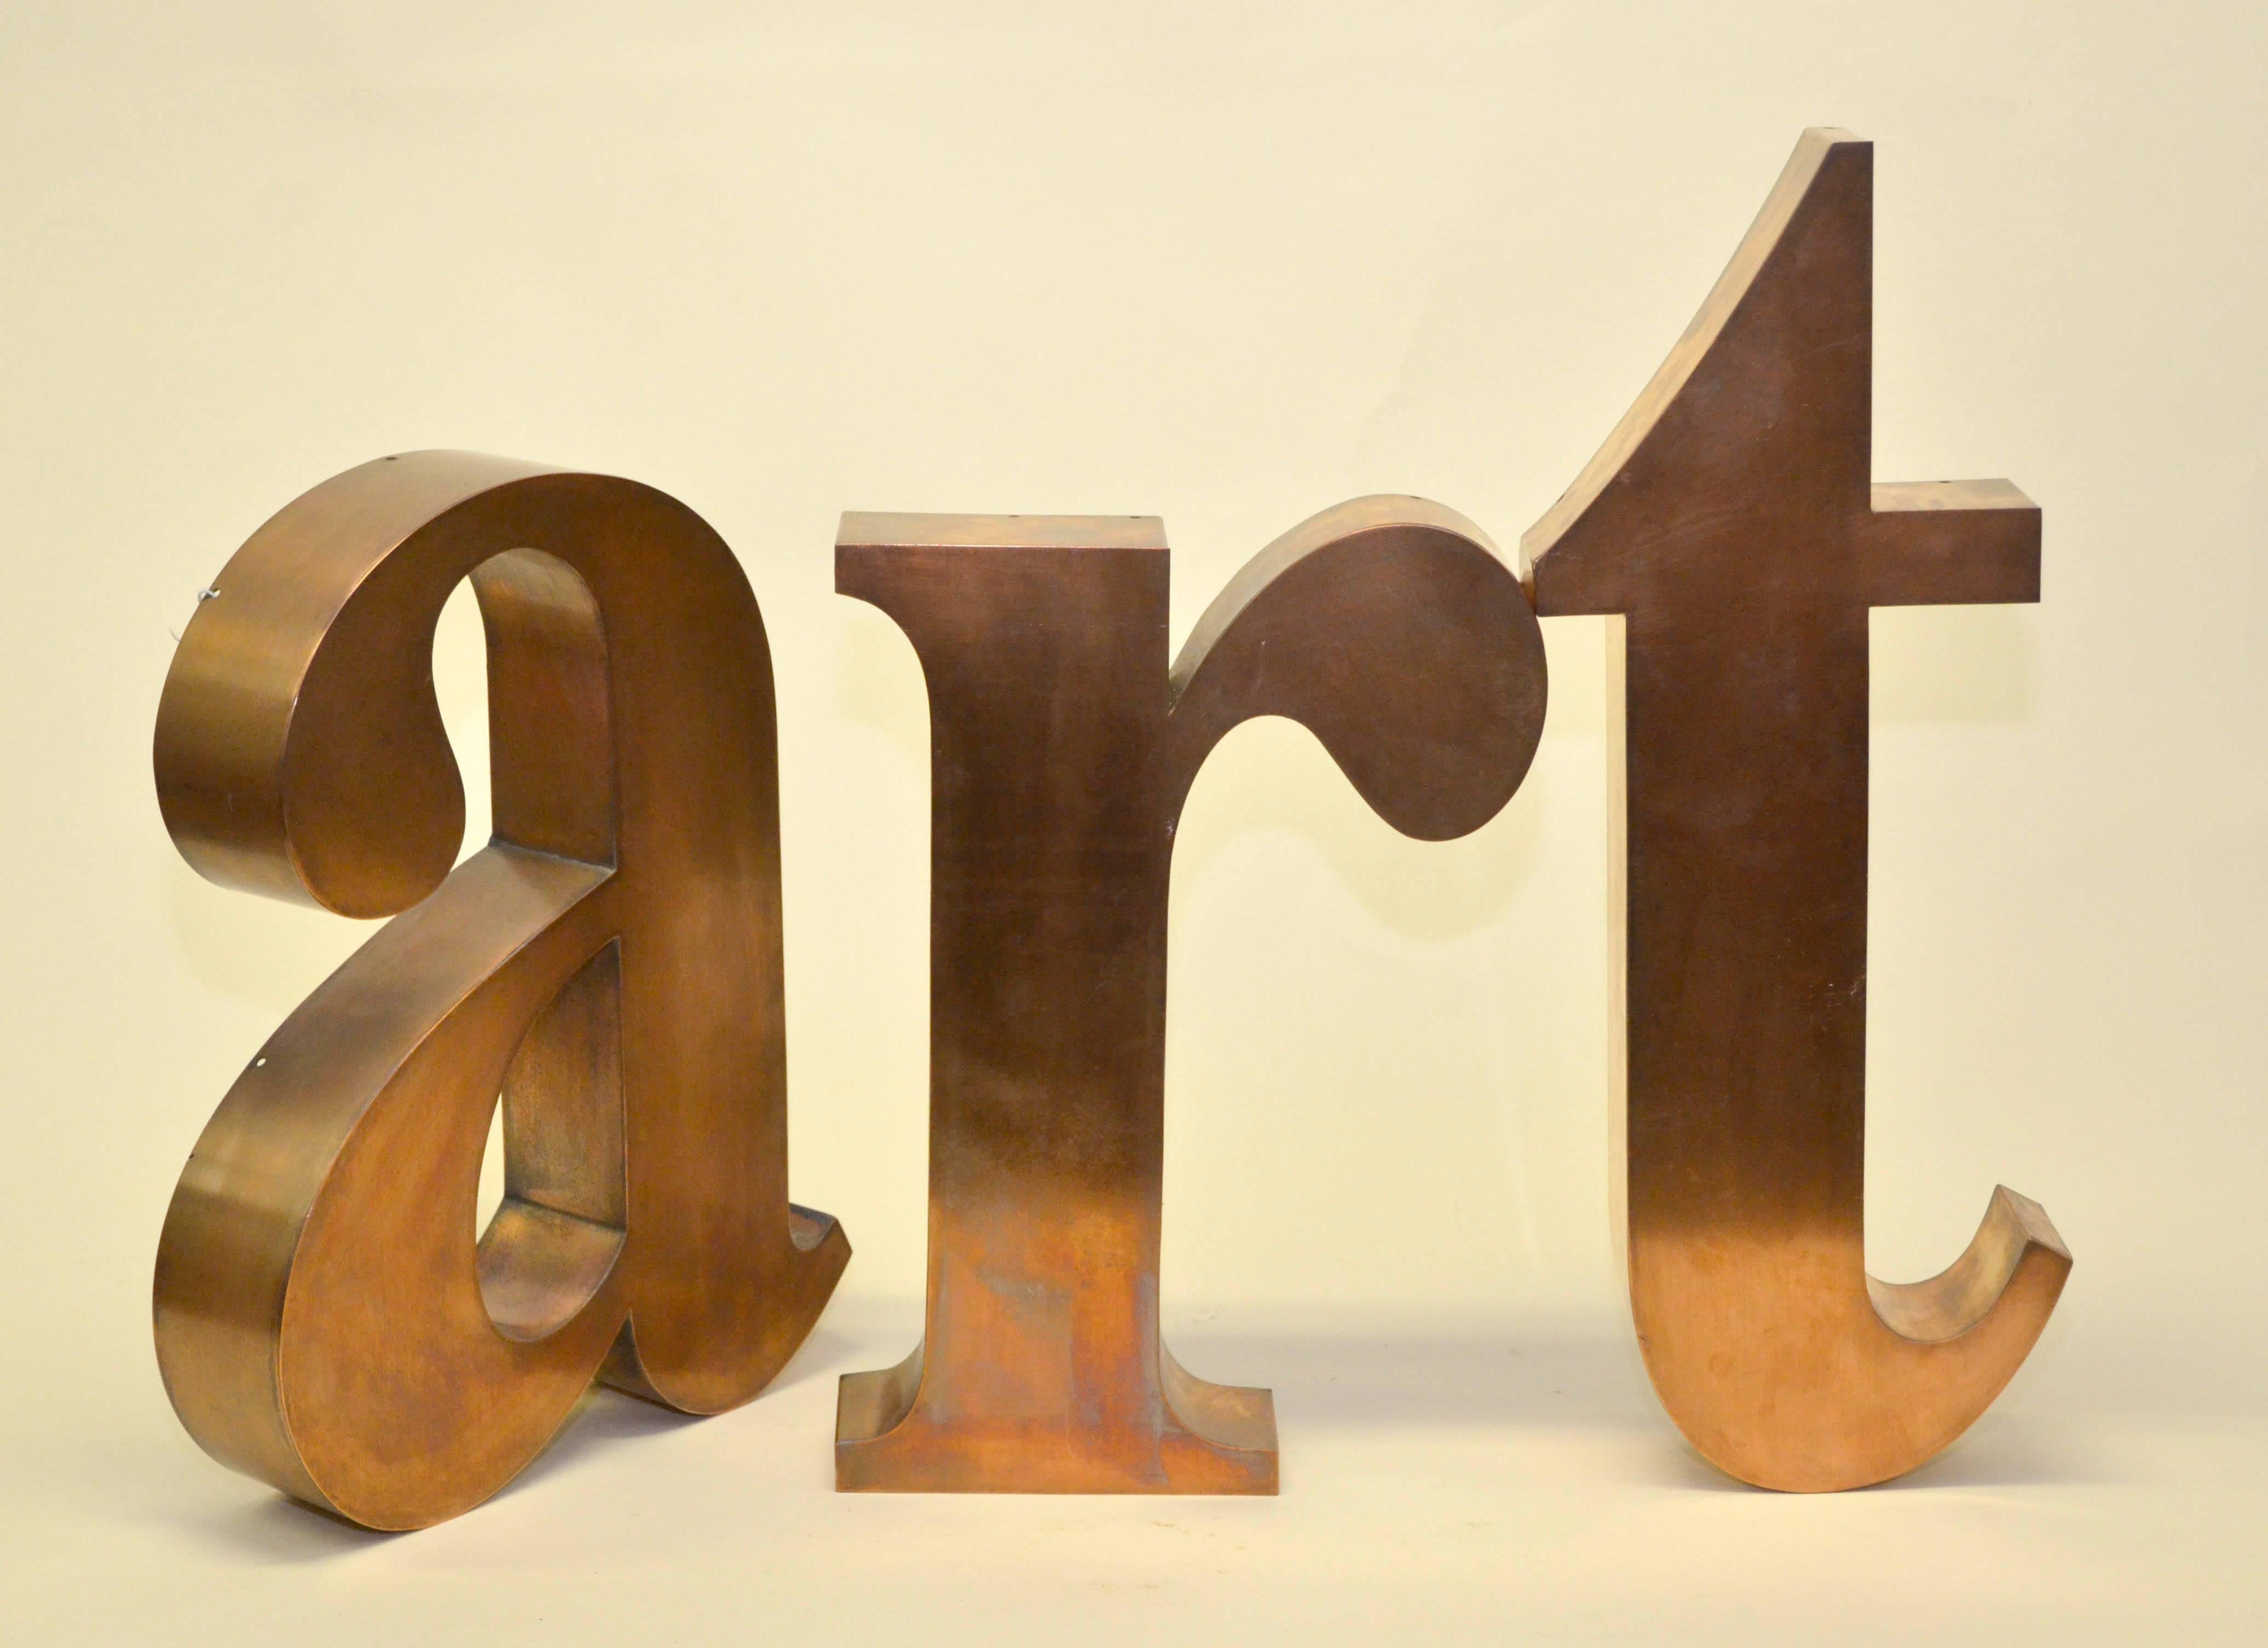 Very collectible group of three Italian lowercase italics letters a, r and t in copper made in the 1960s. 

Grouped together the letters create the word: ART.